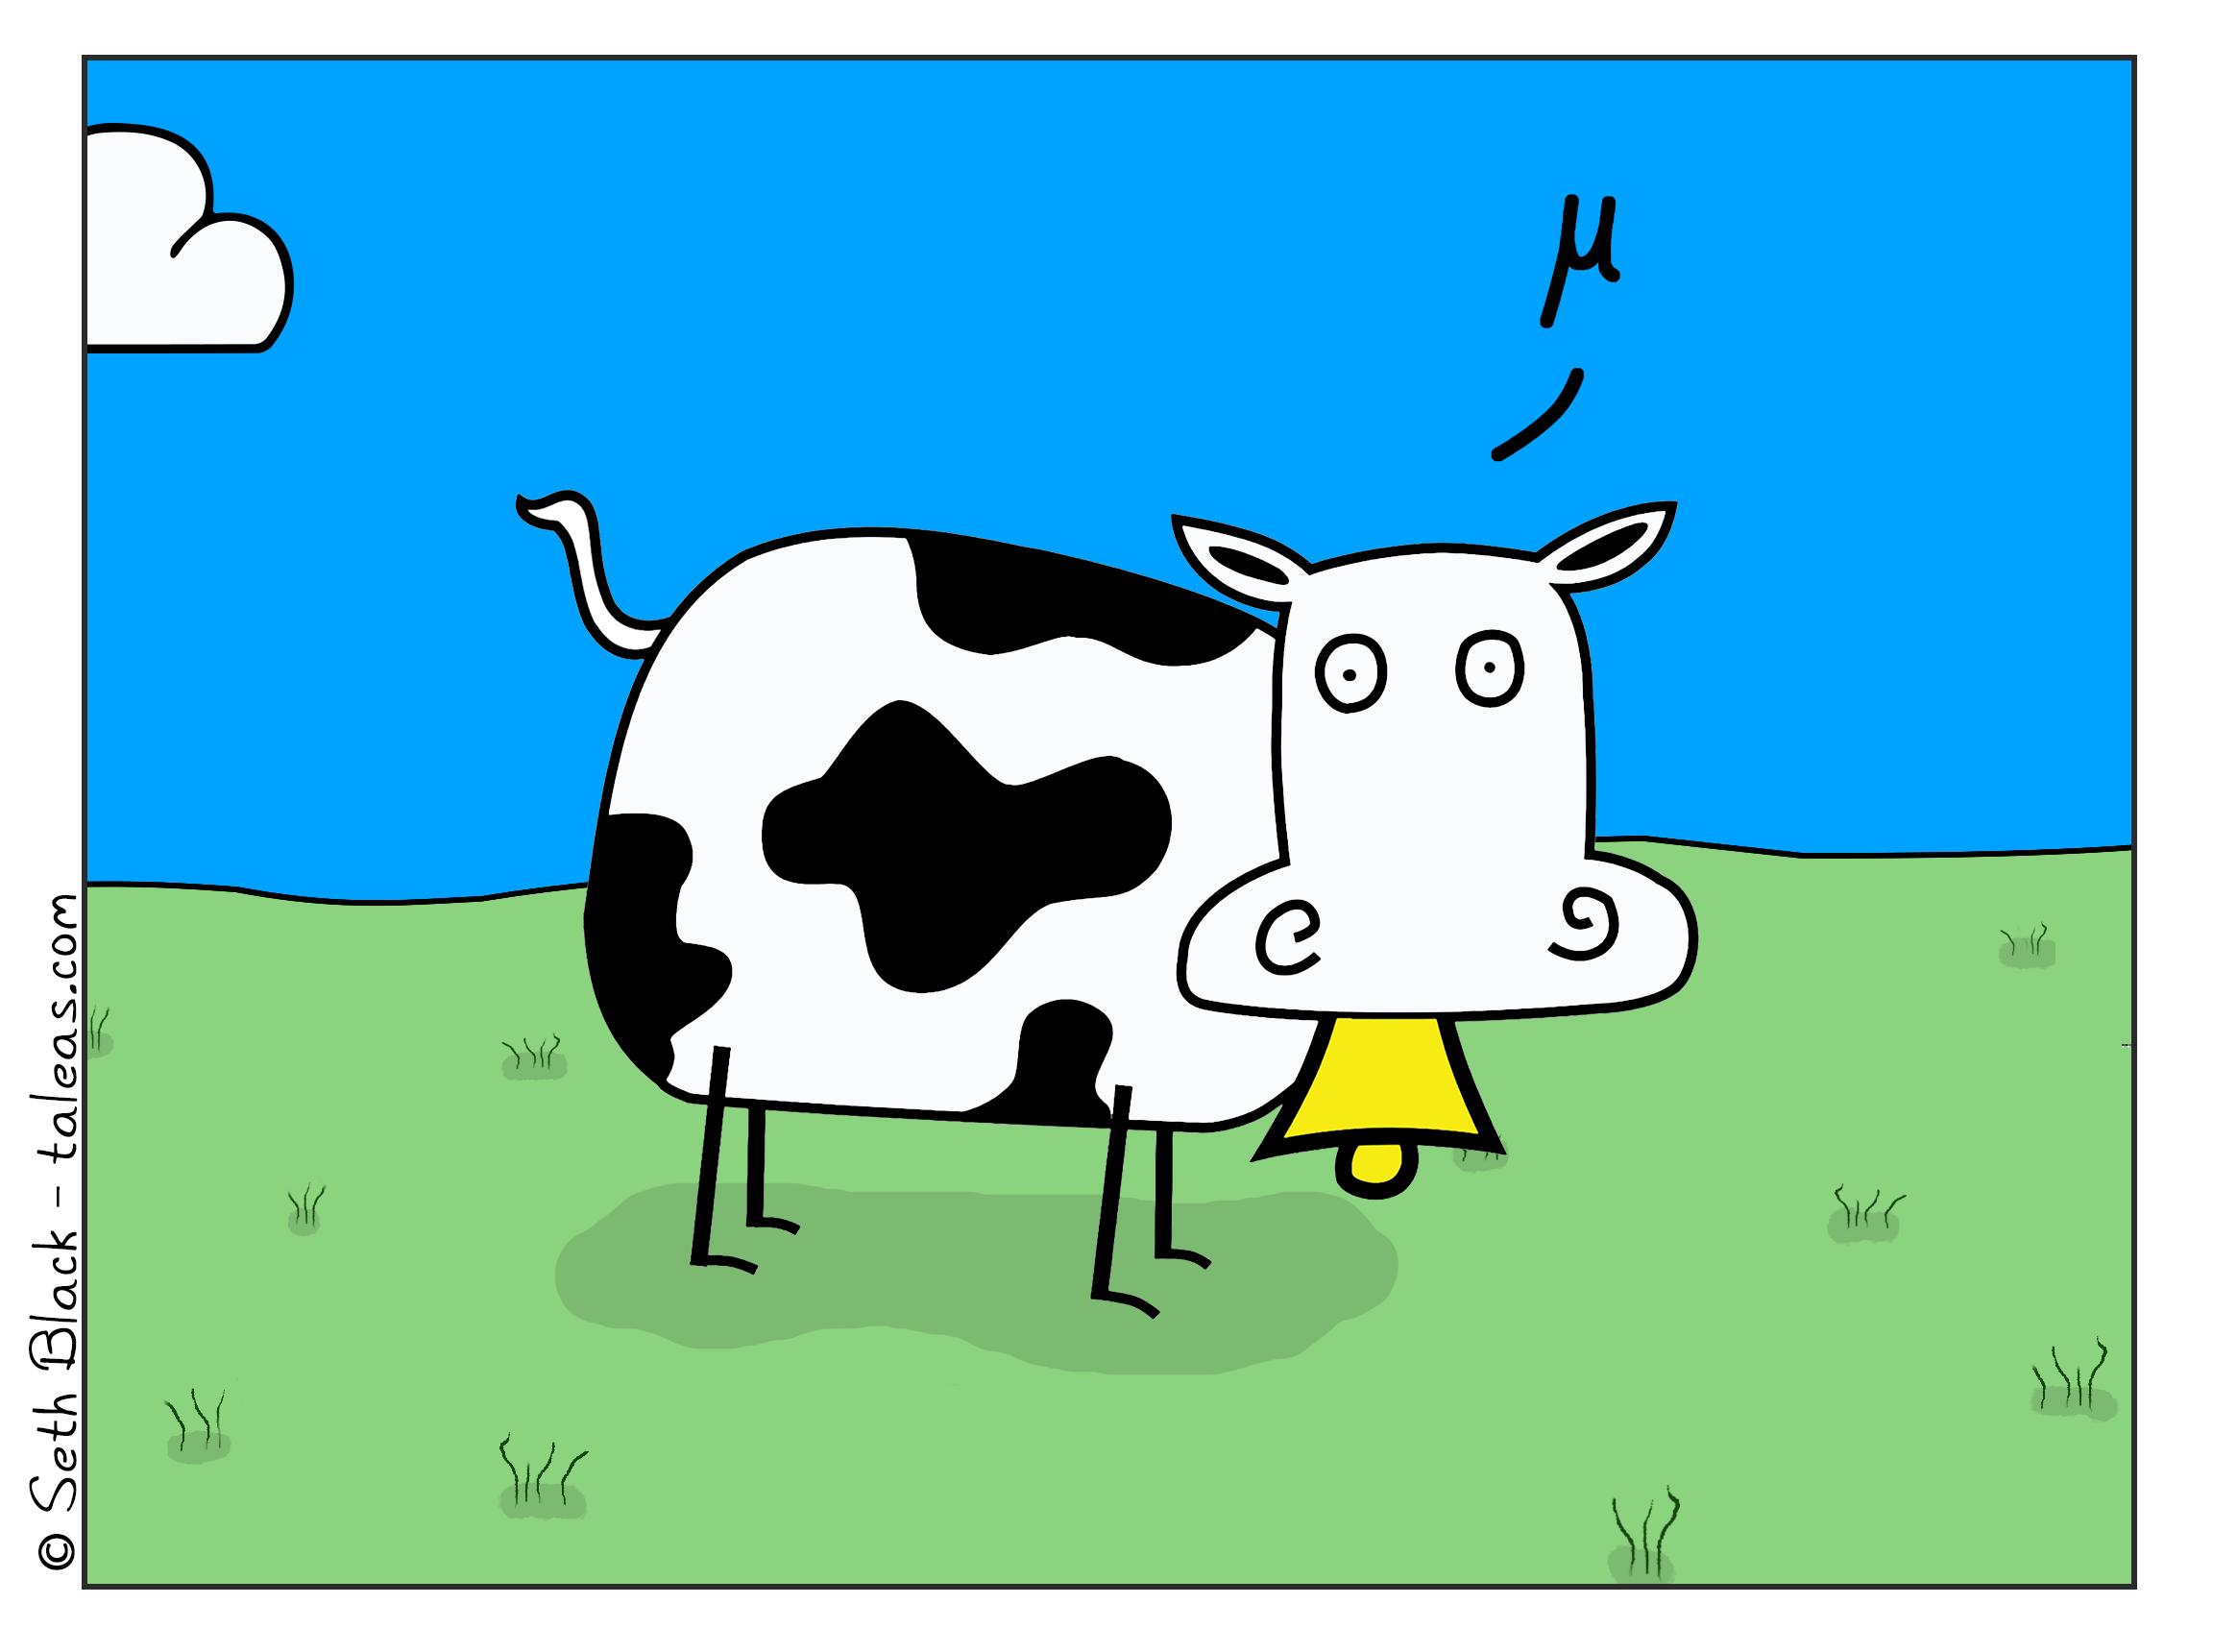 Cow standing in a grassy pasture saying the Greek letter mu instead of moo.